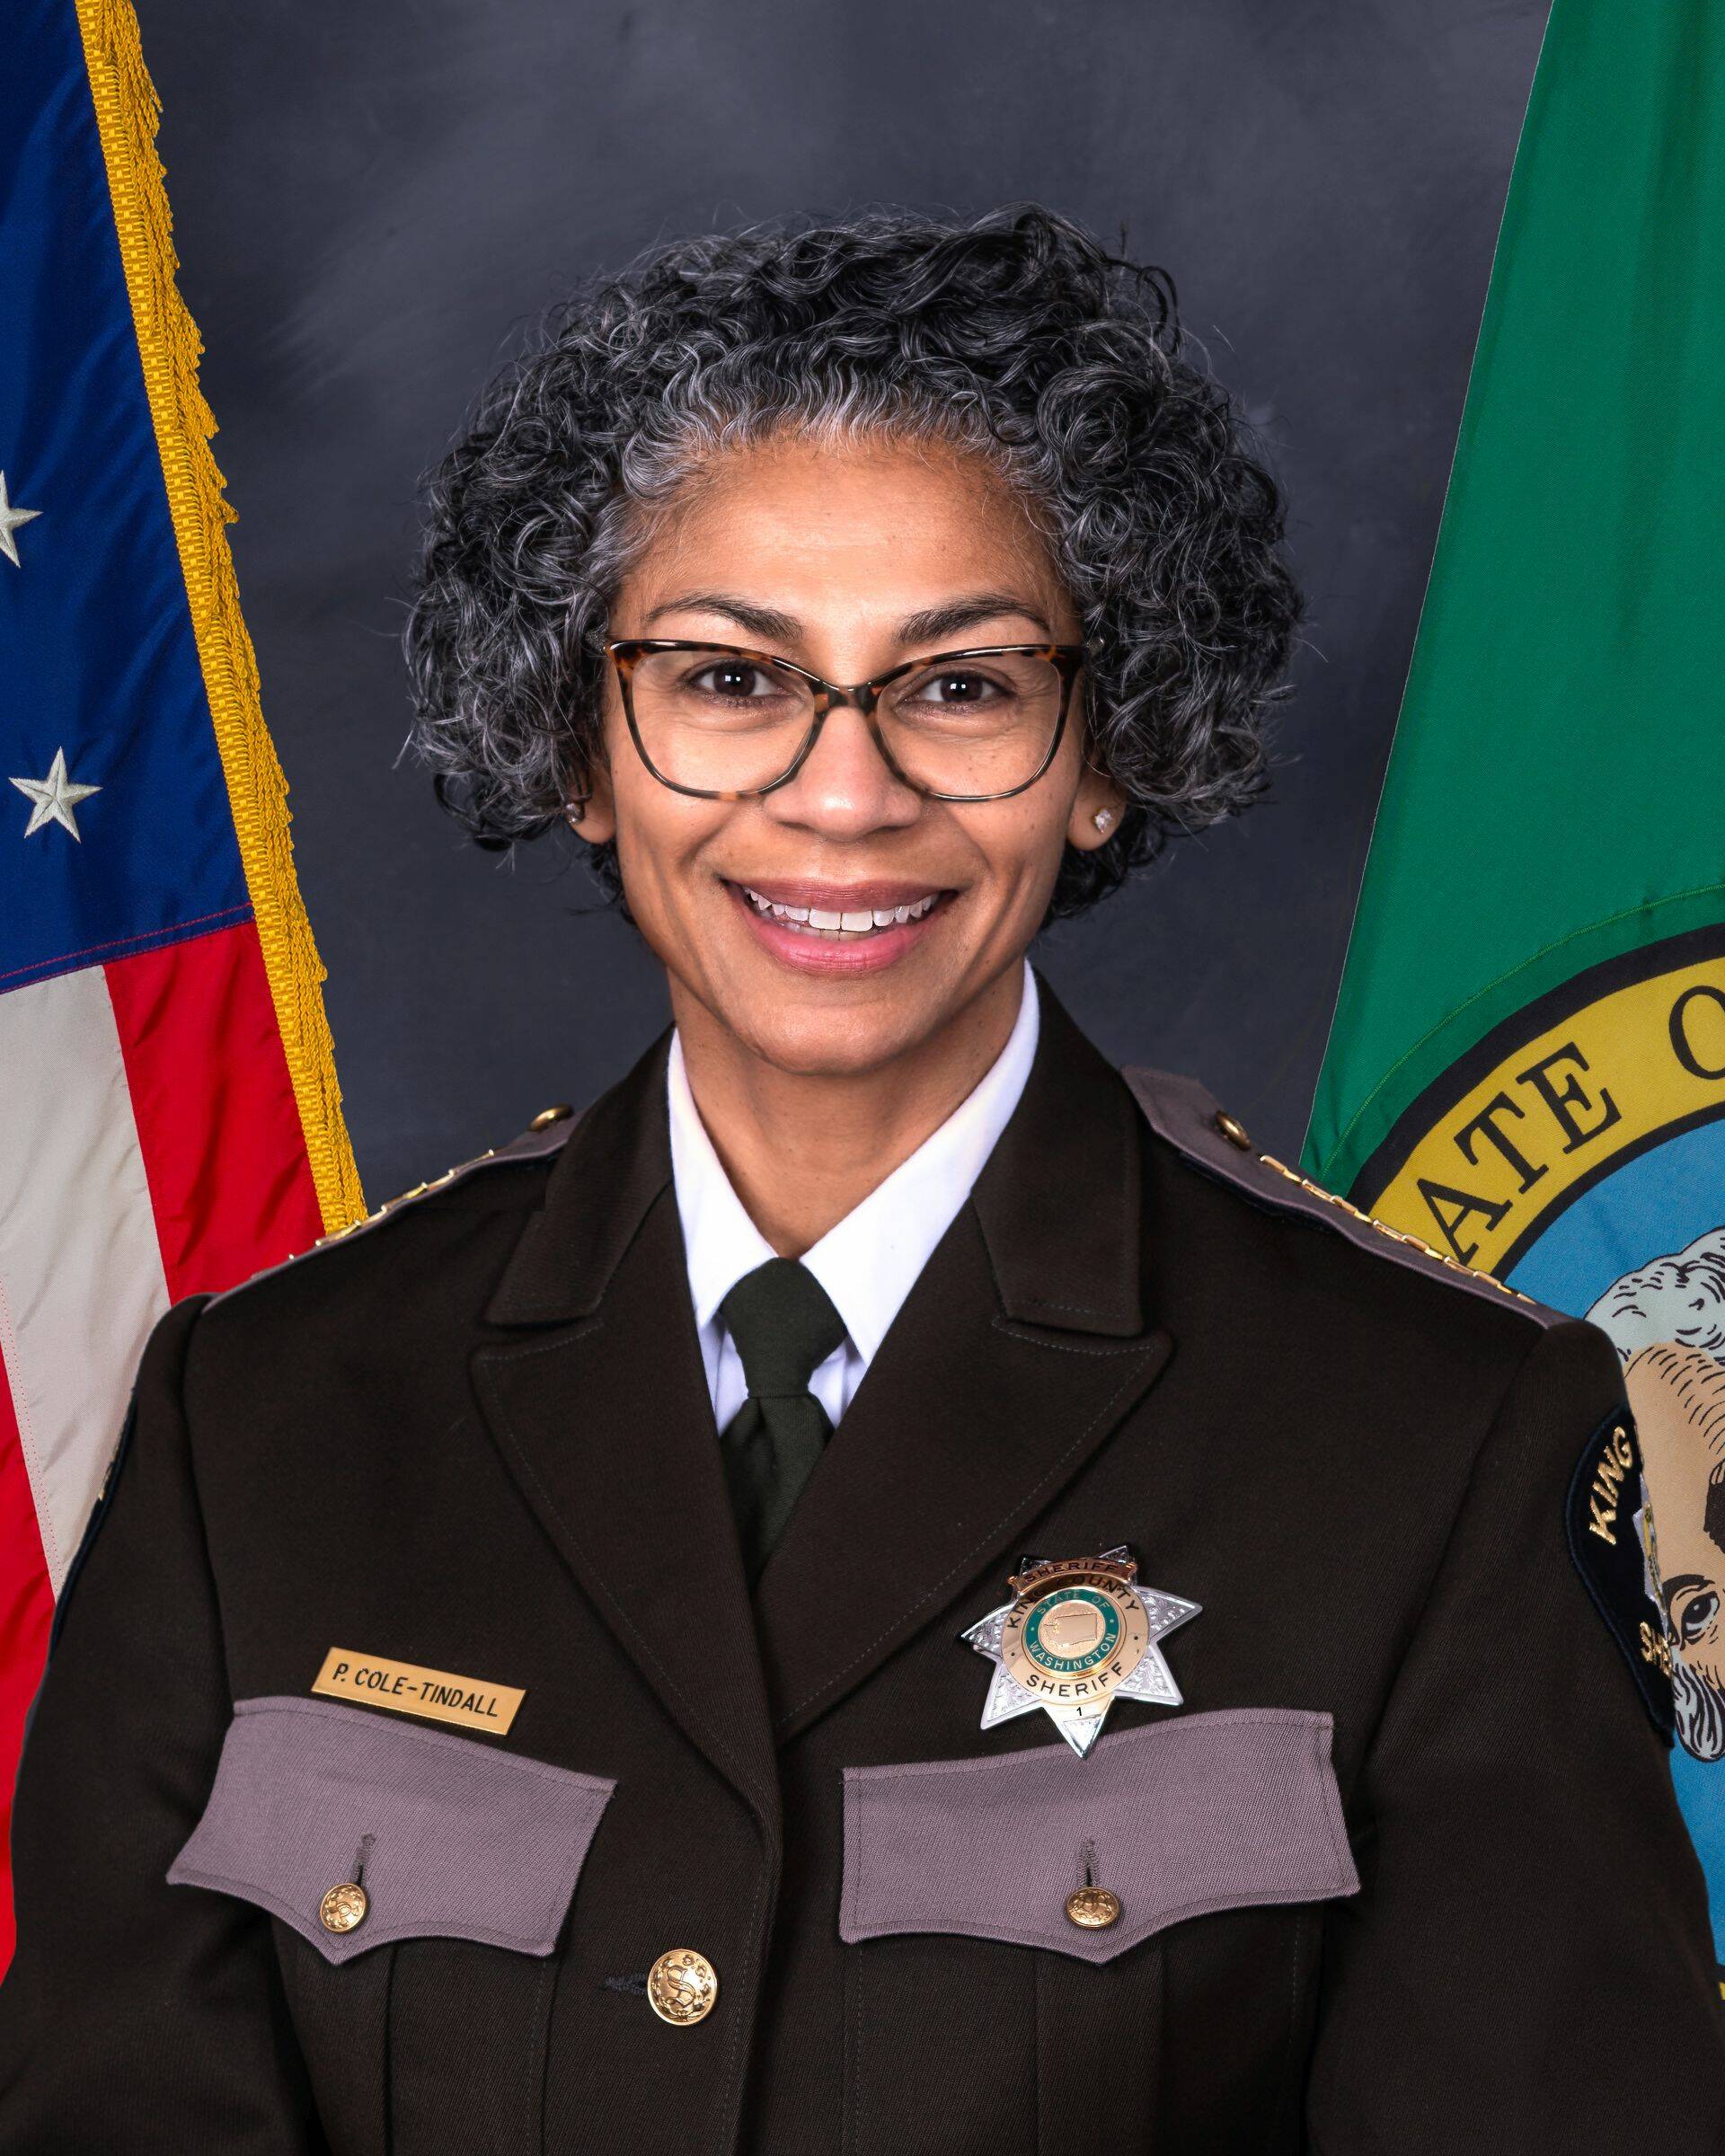 Sheriff Patti Cole-Tindall. Courtesy of King County.